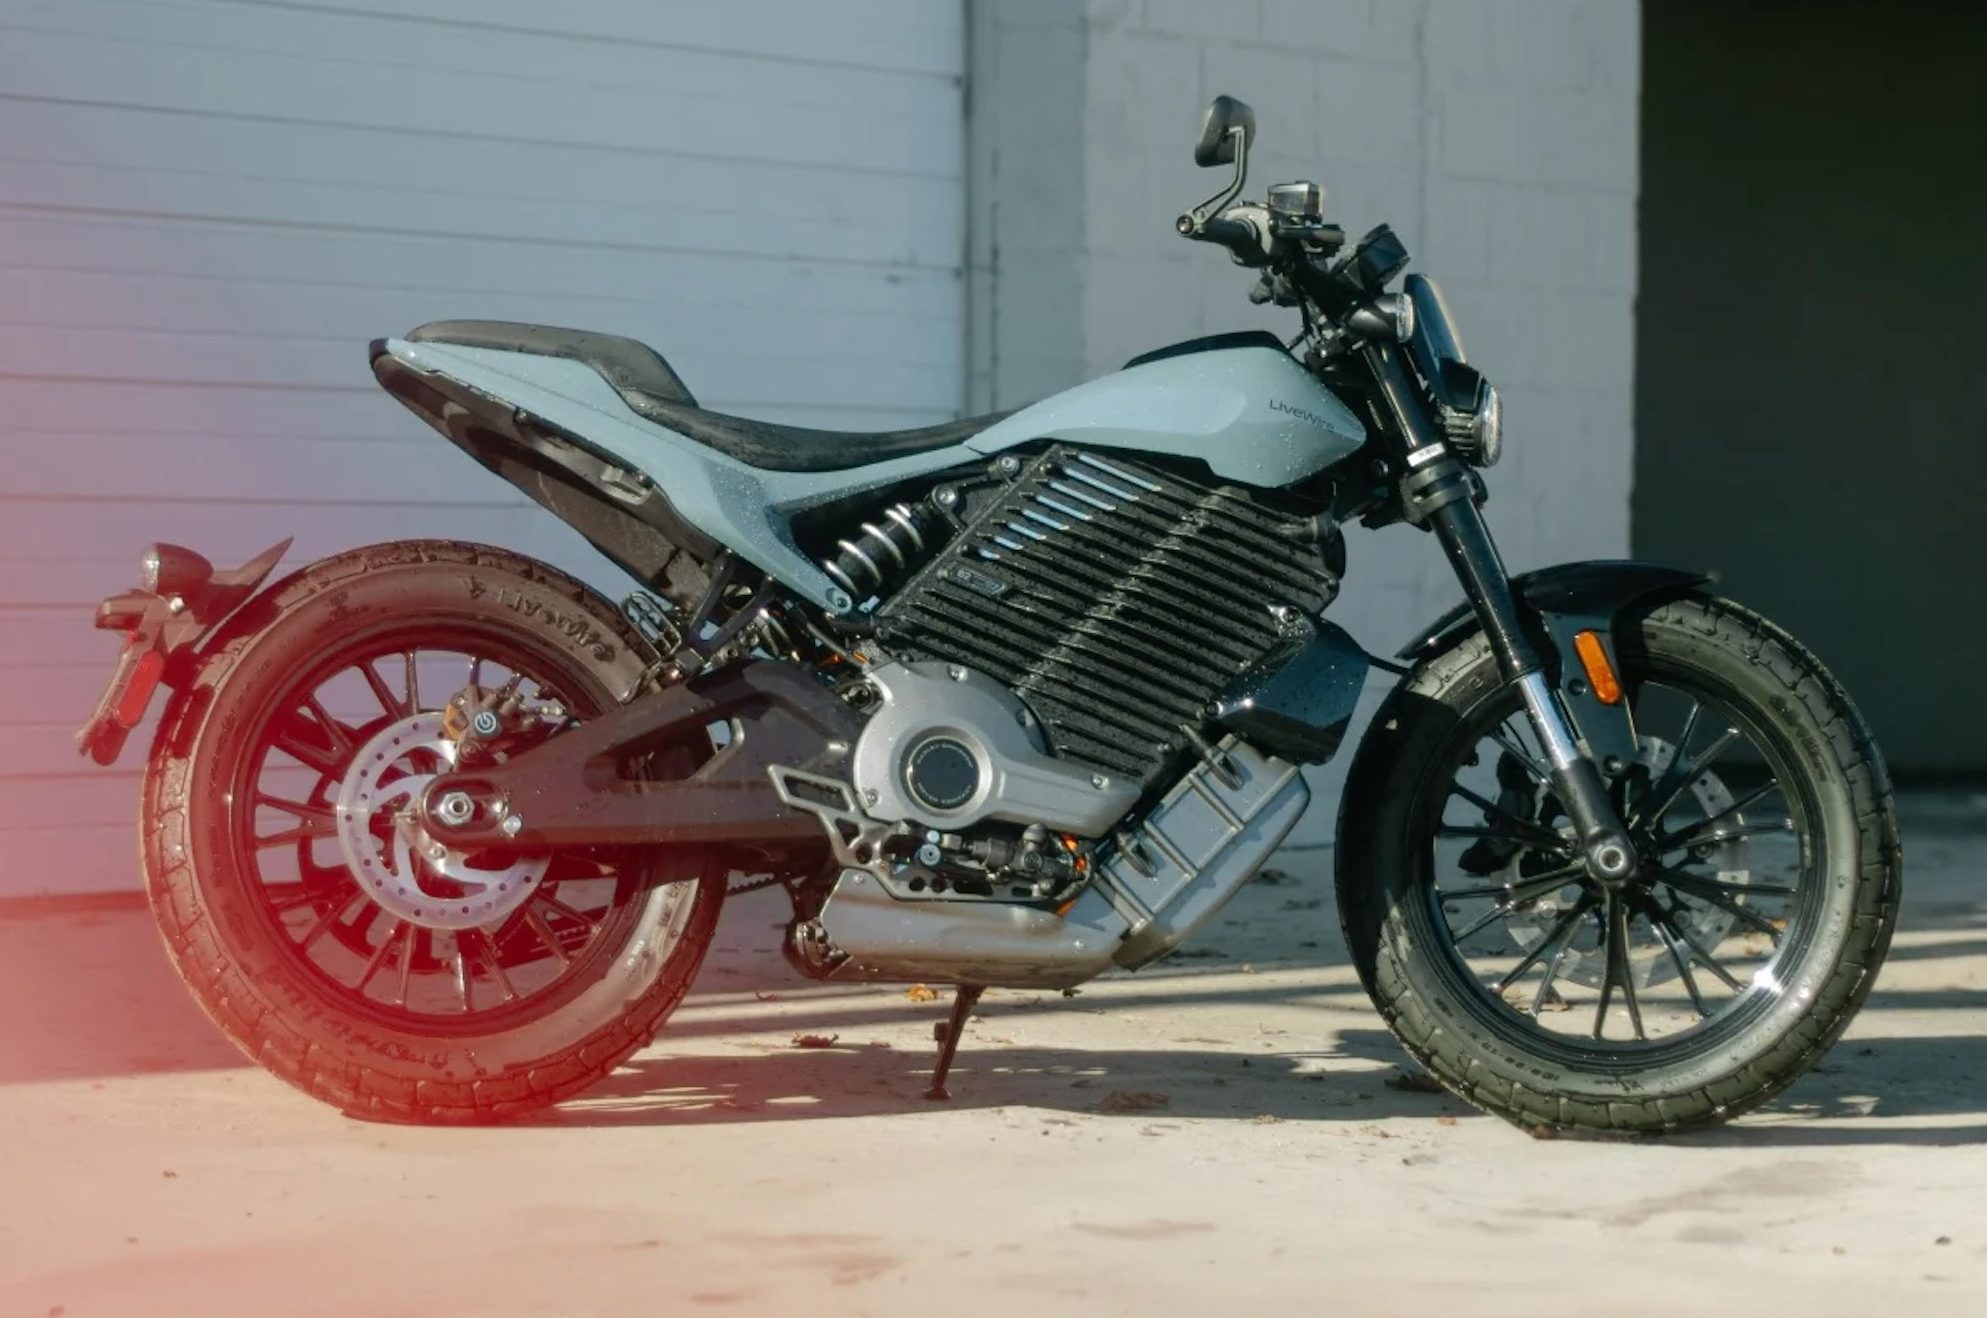 An electric motorcycle in front of a garage.